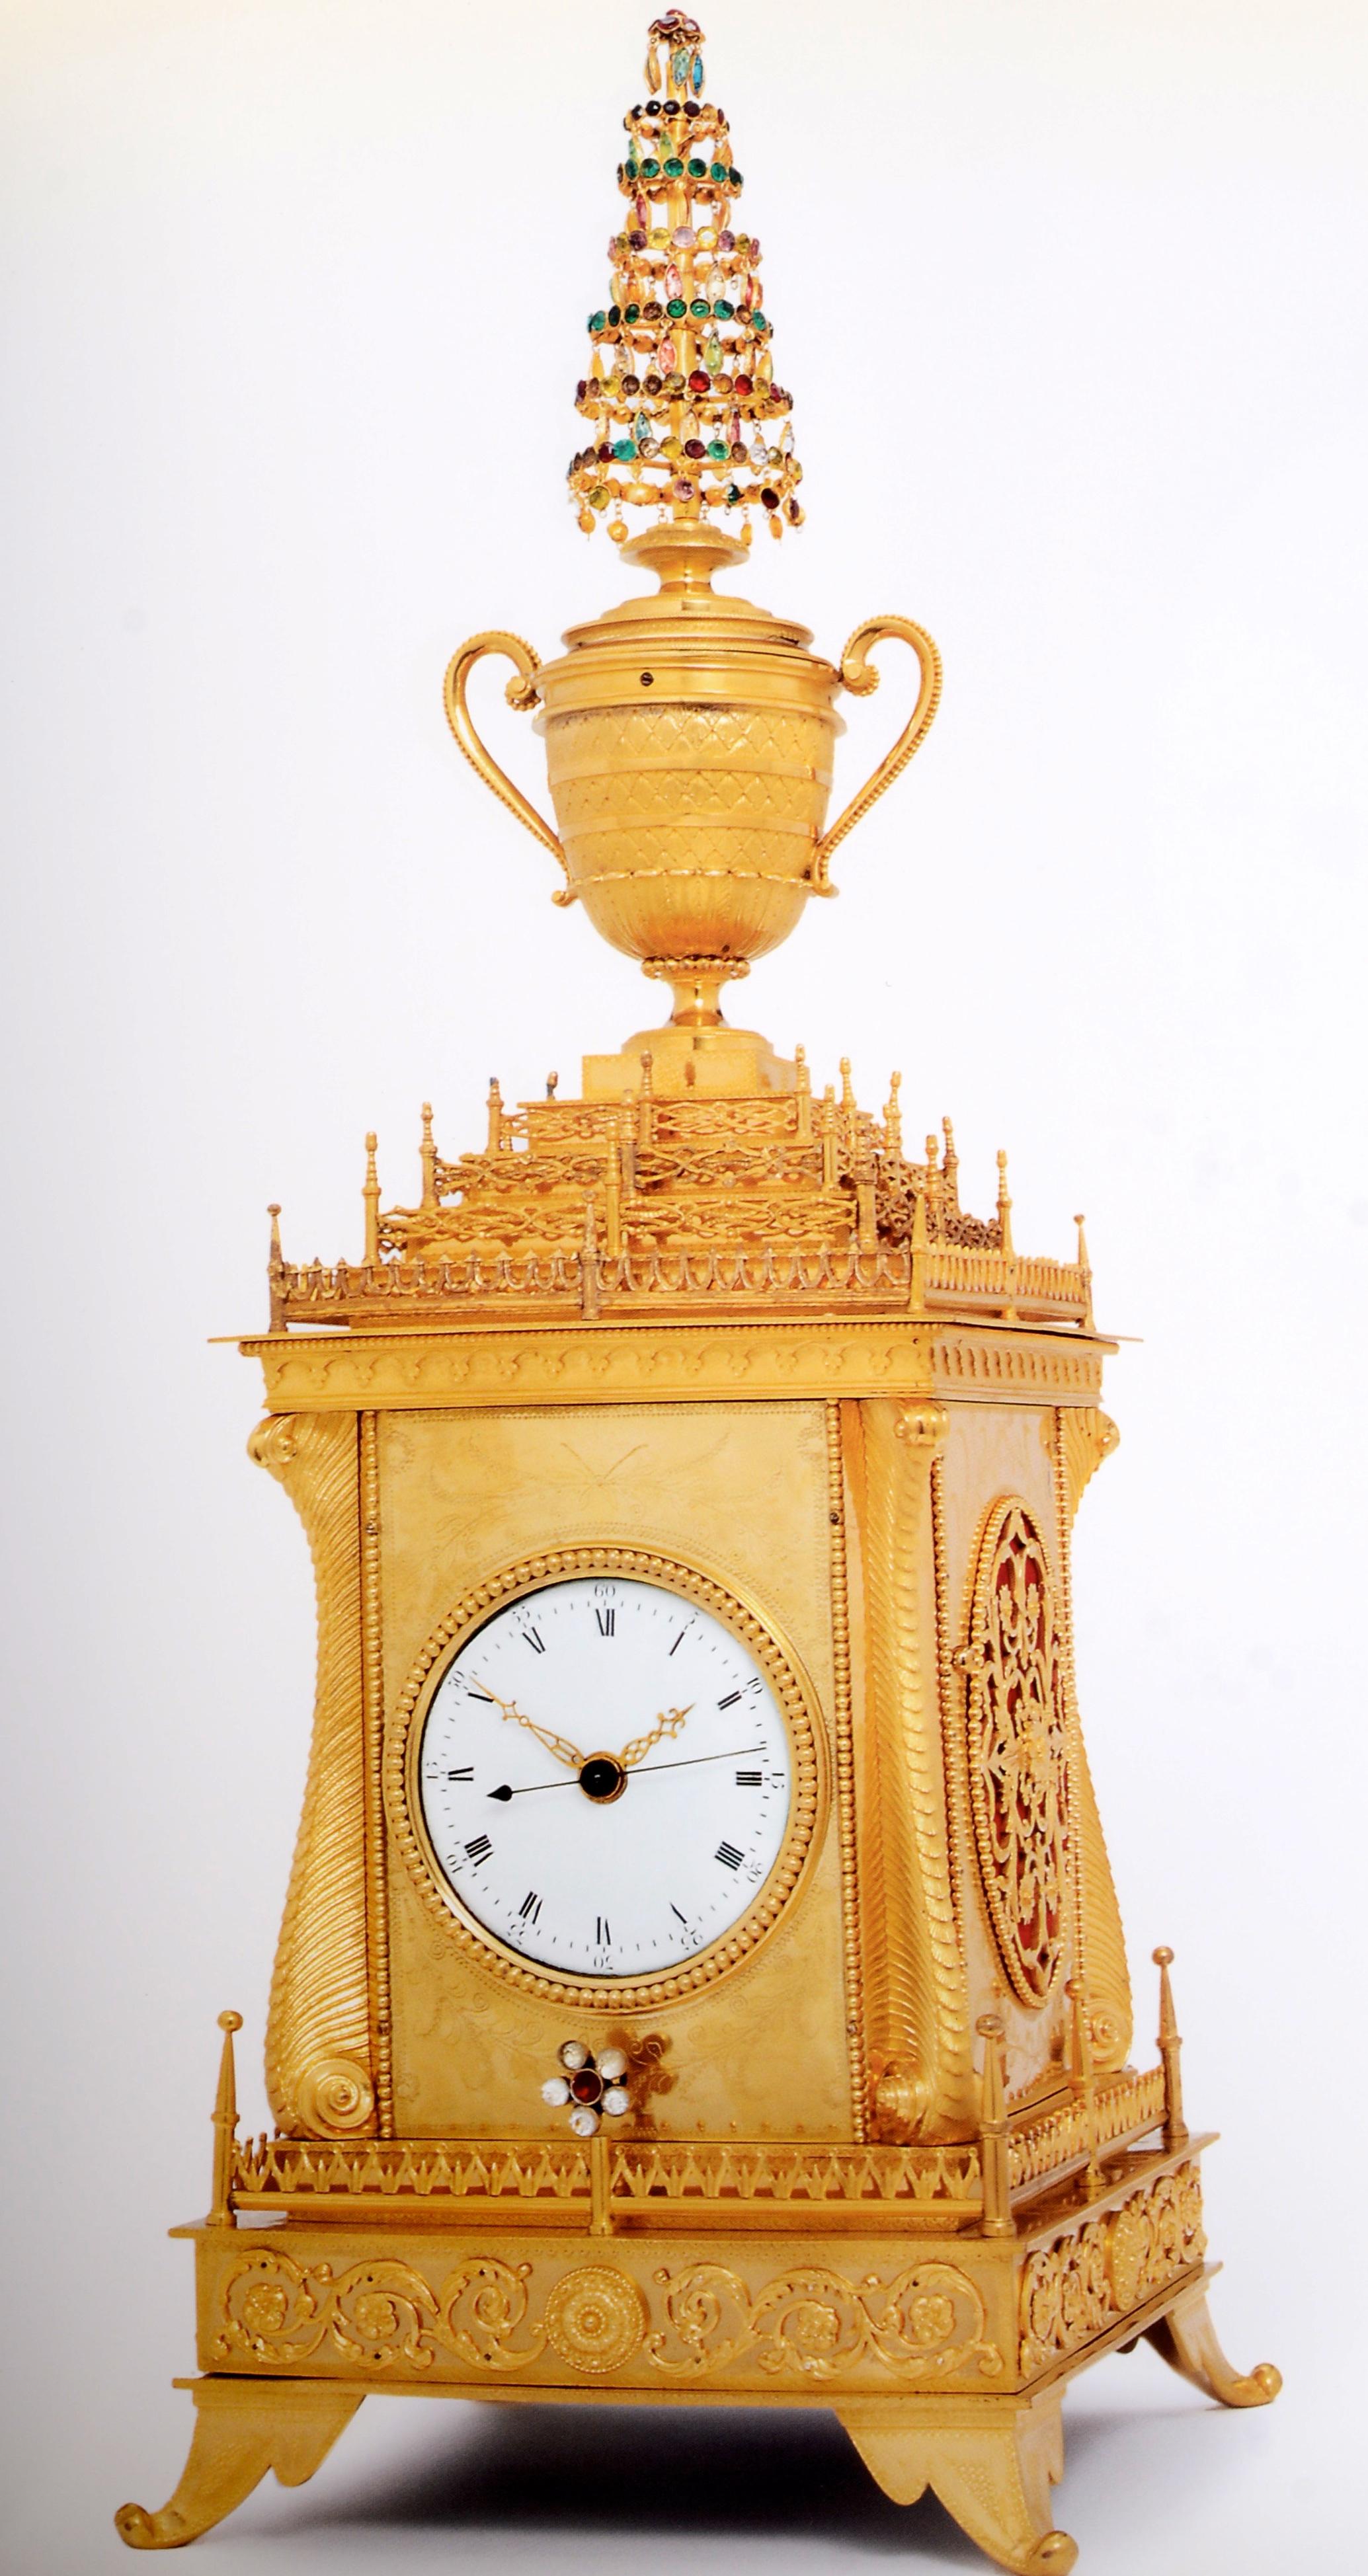 Paper Magnificent Clocks for Chinese Imperial Court from the Nezu Museum, Christie's For Sale